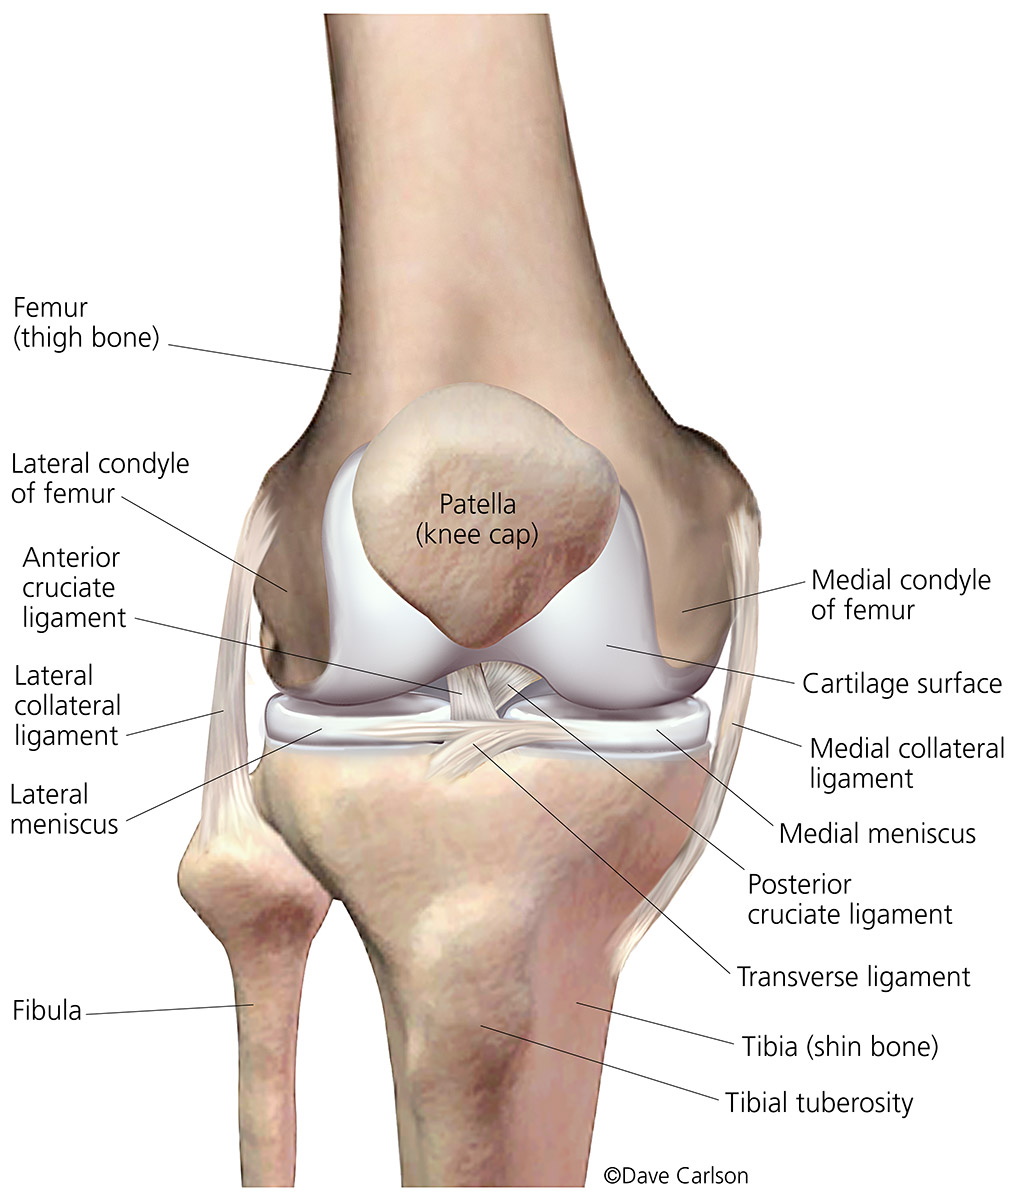 Illustration of the bones, ligaments, cartilage and menisci of the right knee.